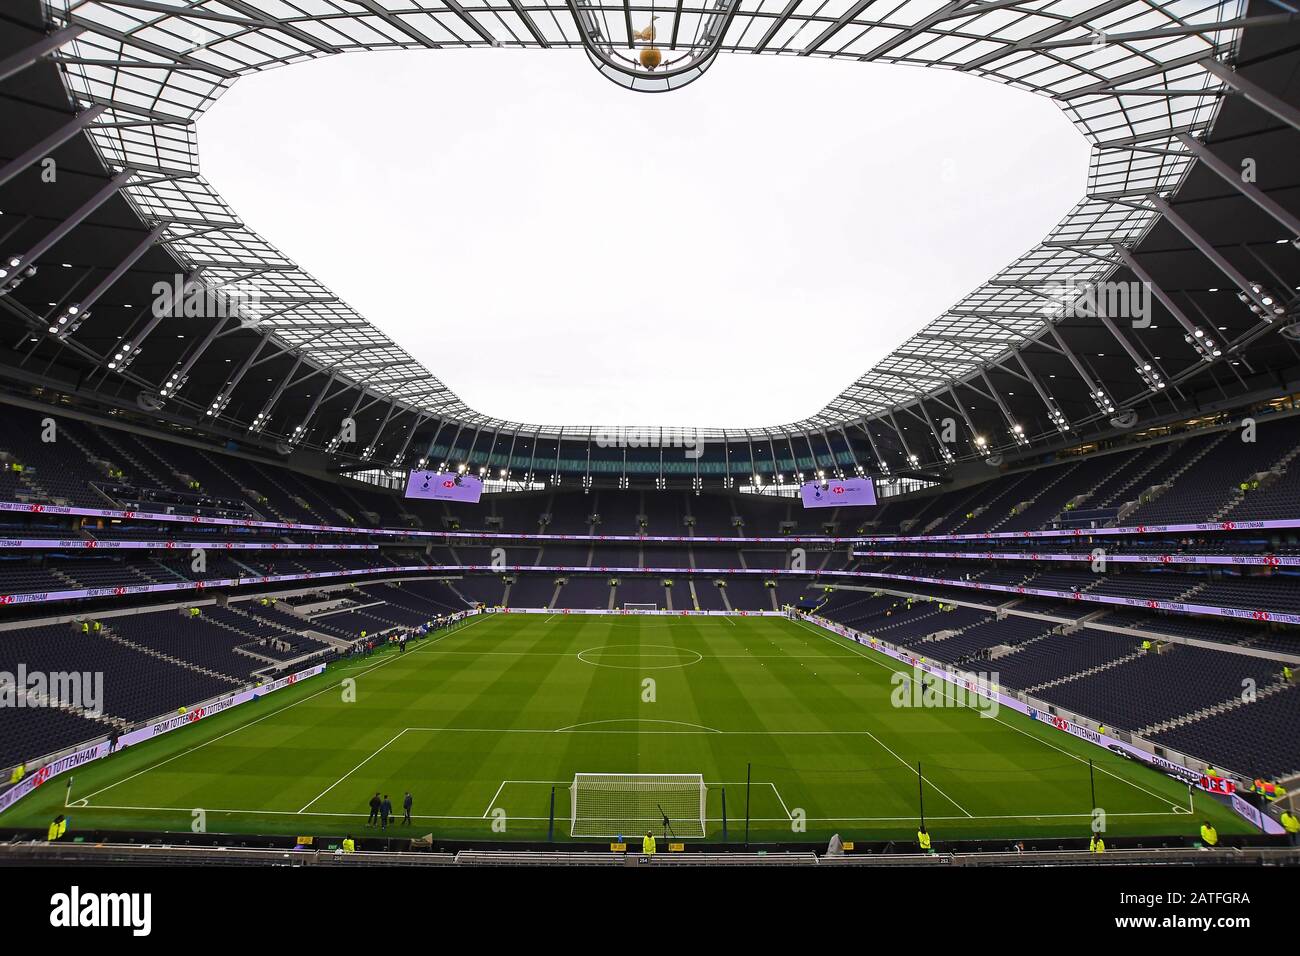 LONDON, ENGLAND - FEBRUARY 2, 2020: General view of the venue seen ahead of the 2019/20 Premier League game between Tottenham Hotspur FC and Manchester City FC at Tottenham Hotspur Stadium. Stock Photo